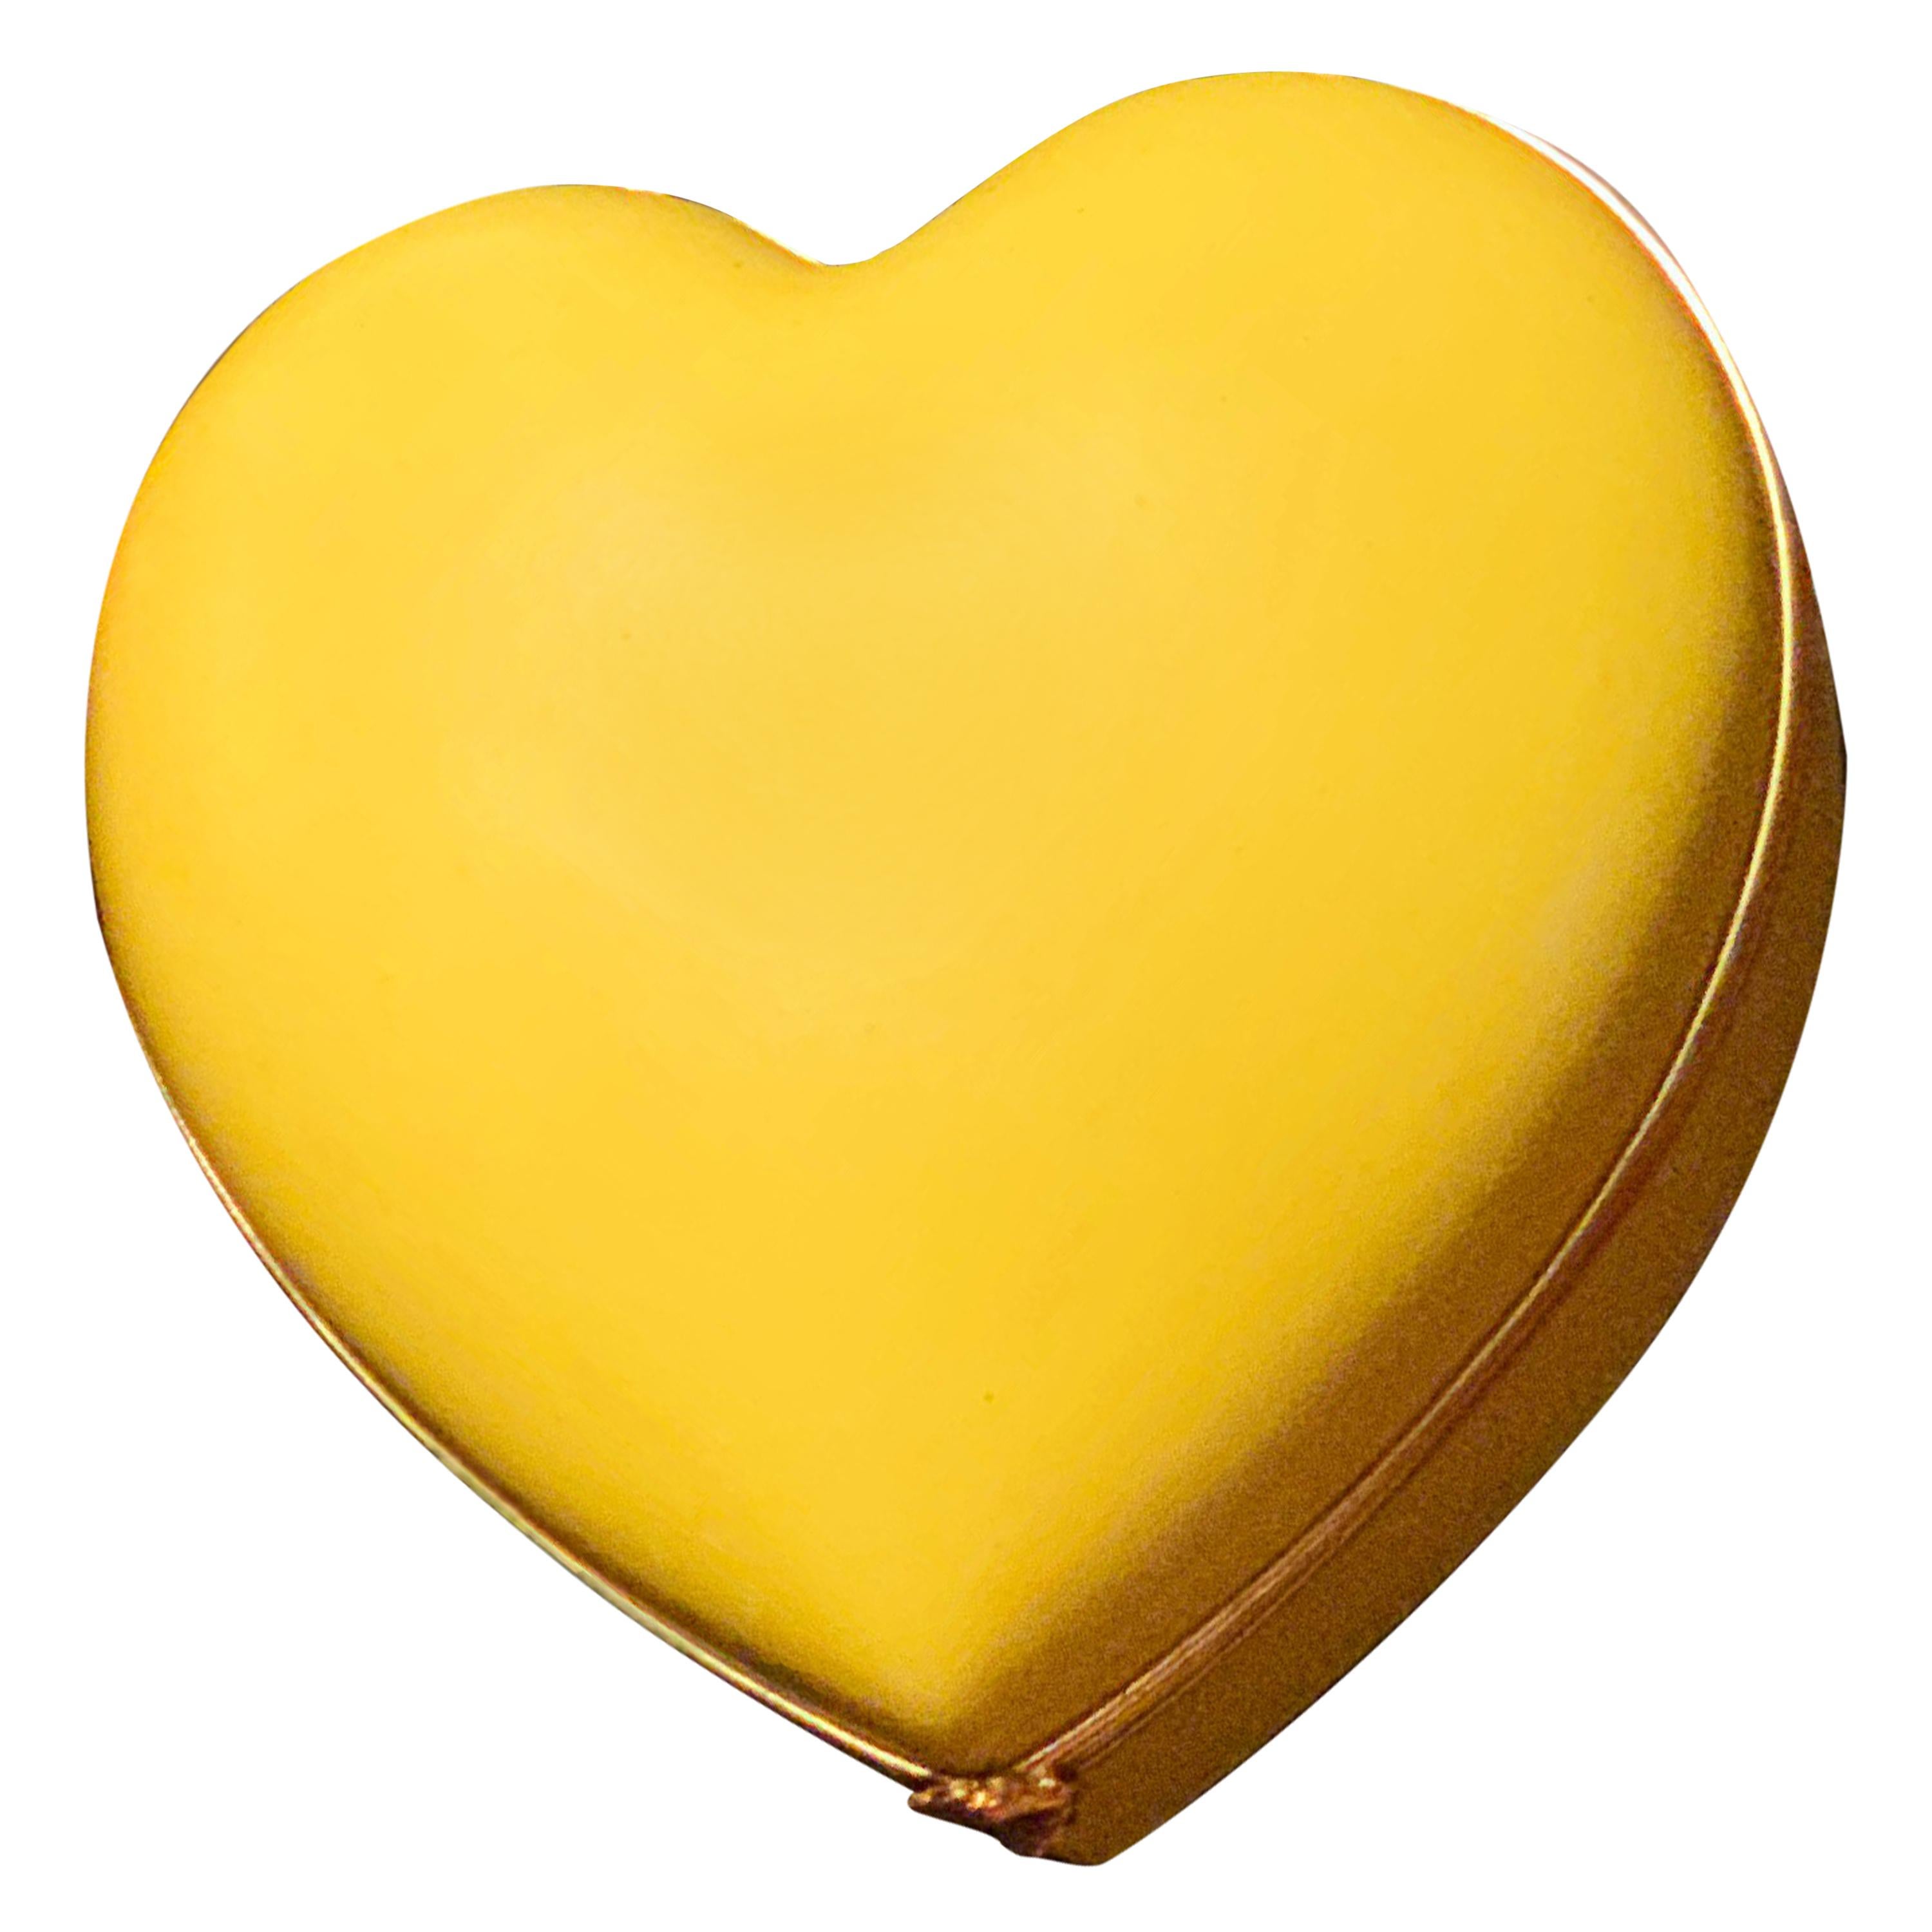 Limoges Porcelain Heart Trinket Box, Canary Yellow, French Porcelain Jewelry Box